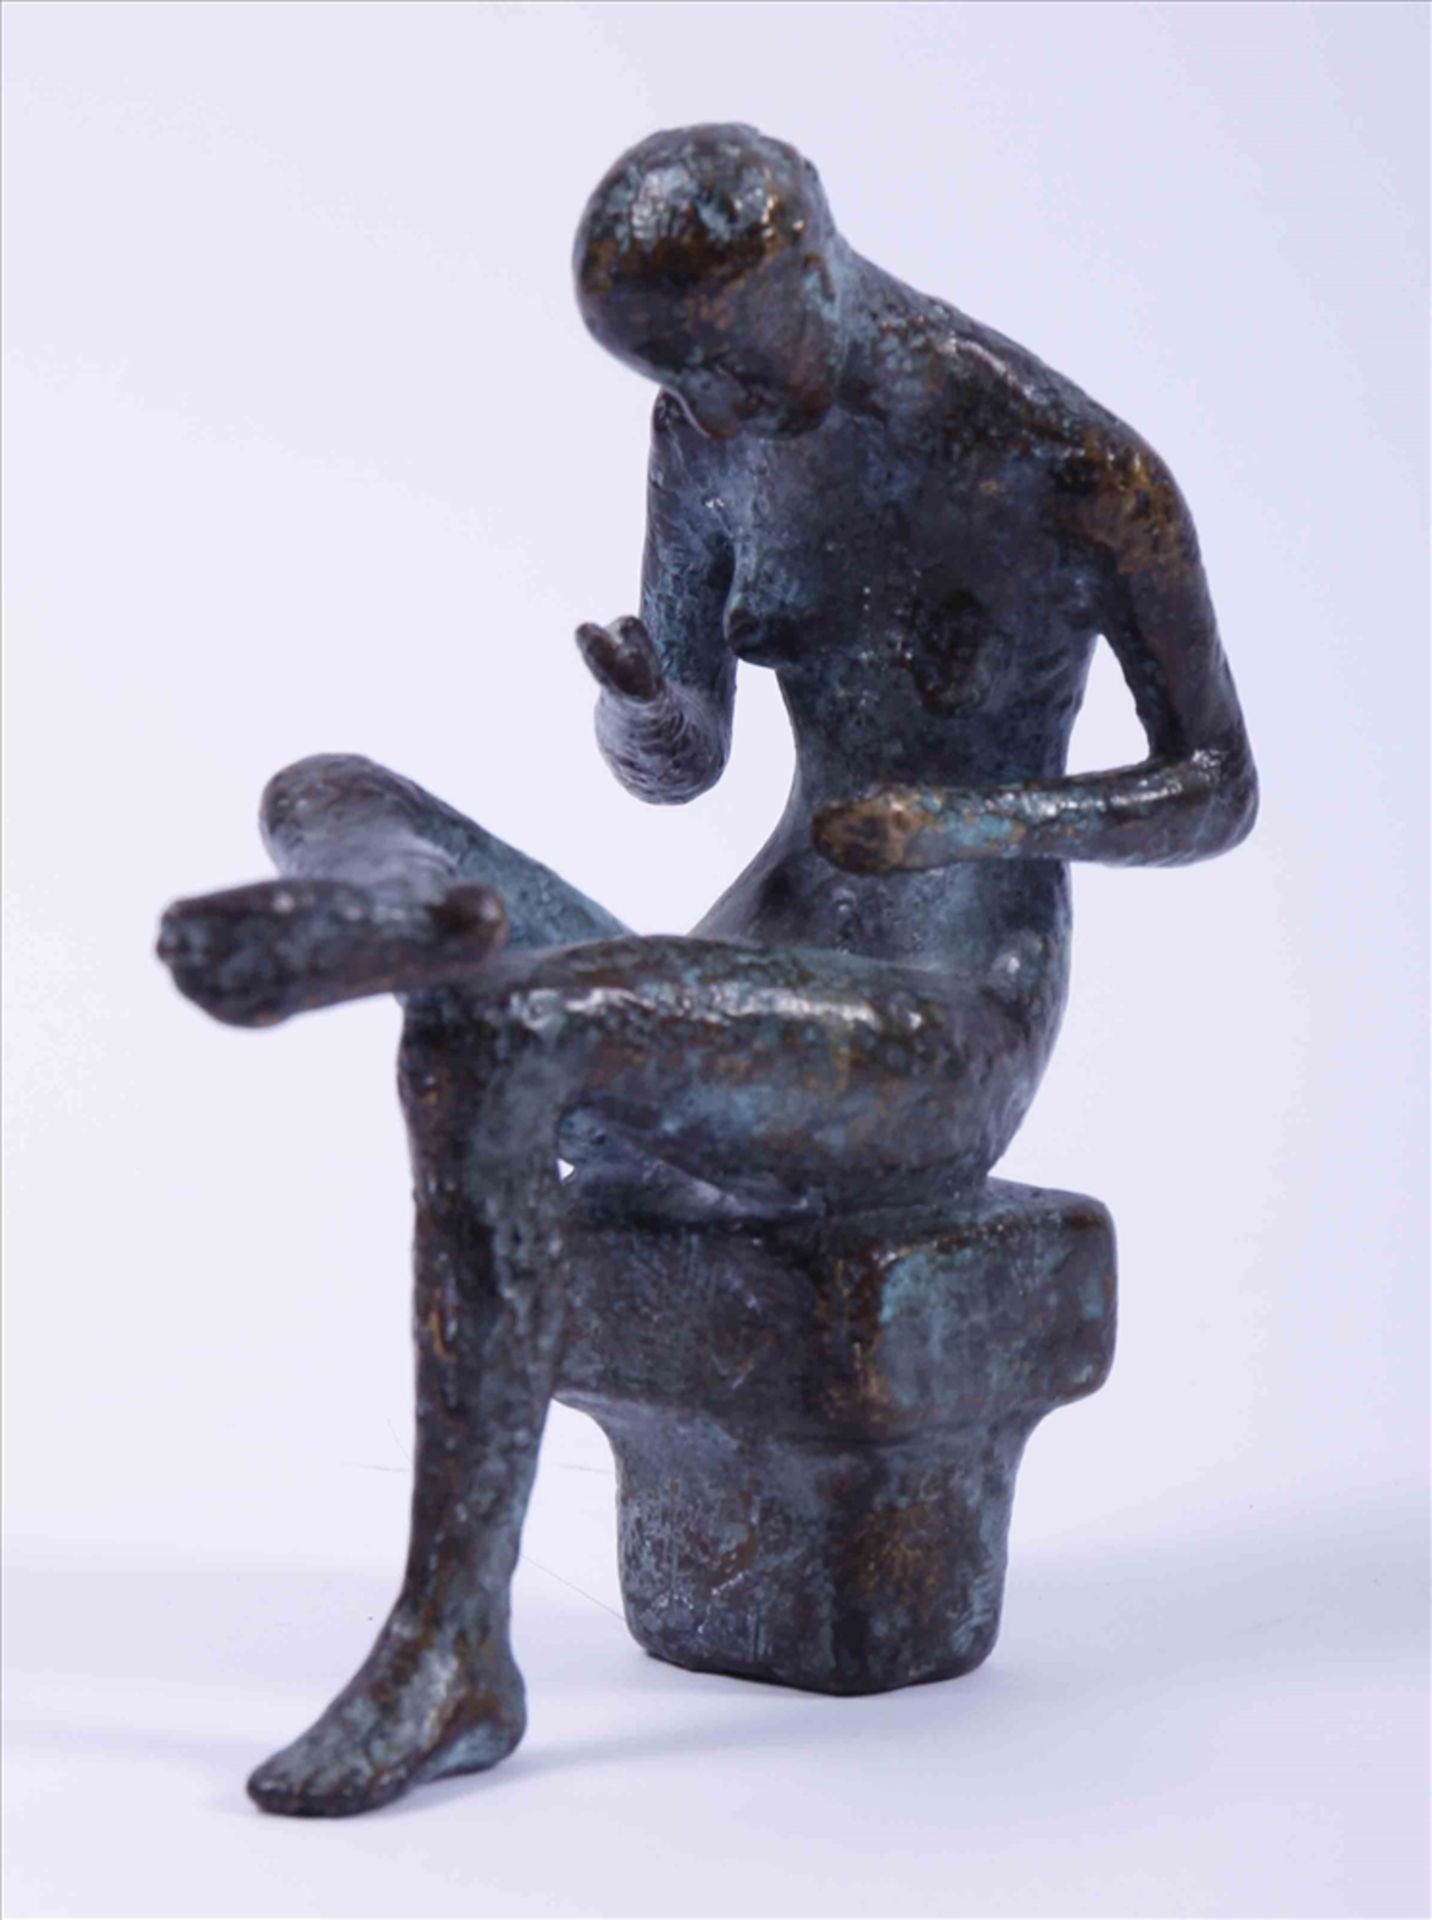 zurückgezogenSmall, seated woman, bronze, partially patinated, signed and dated (19)92 verso, H: